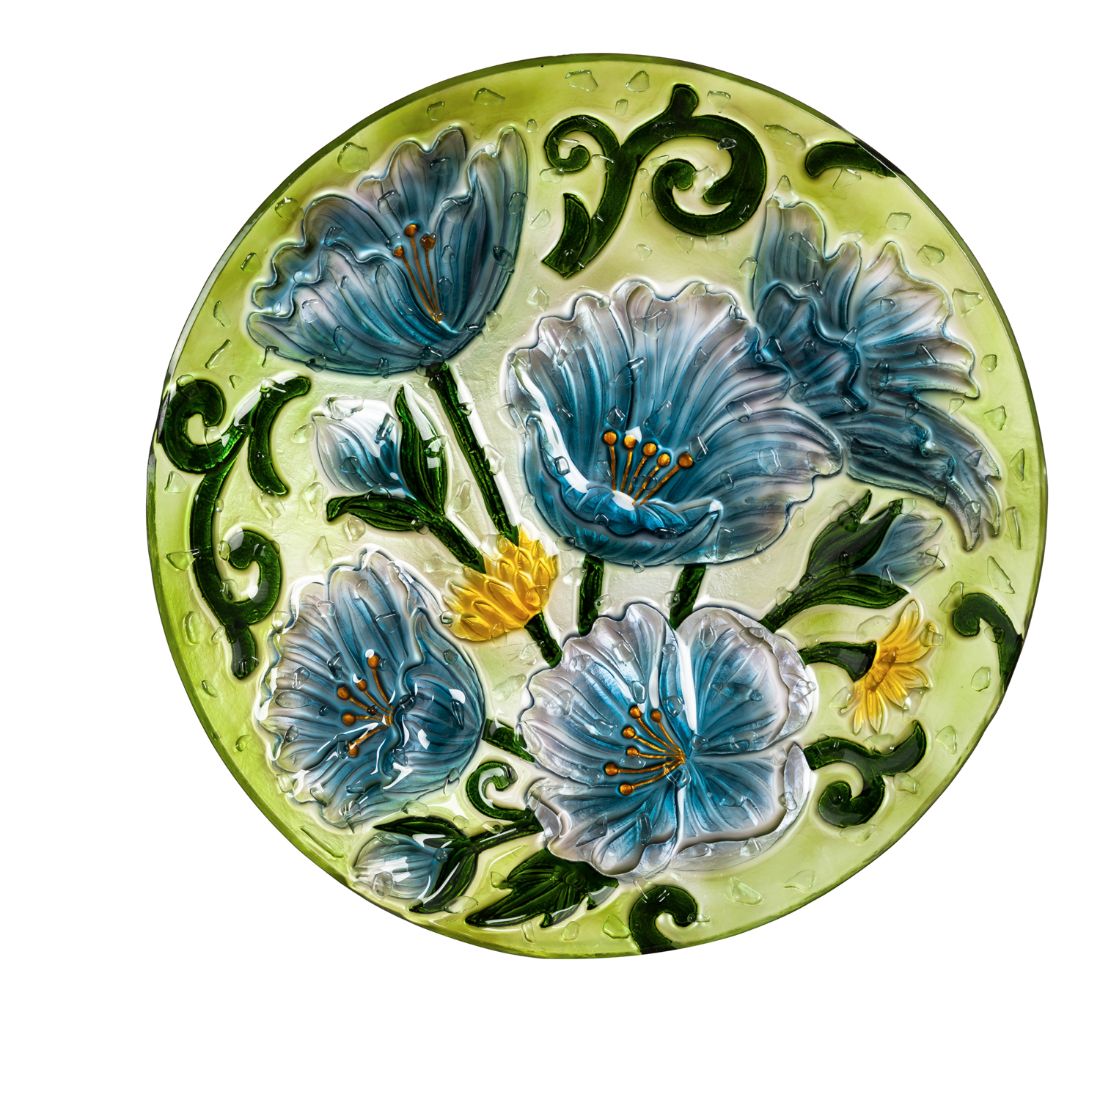 18" Hand Painted Bird Bath with Crushed Glass, Blue Poppies